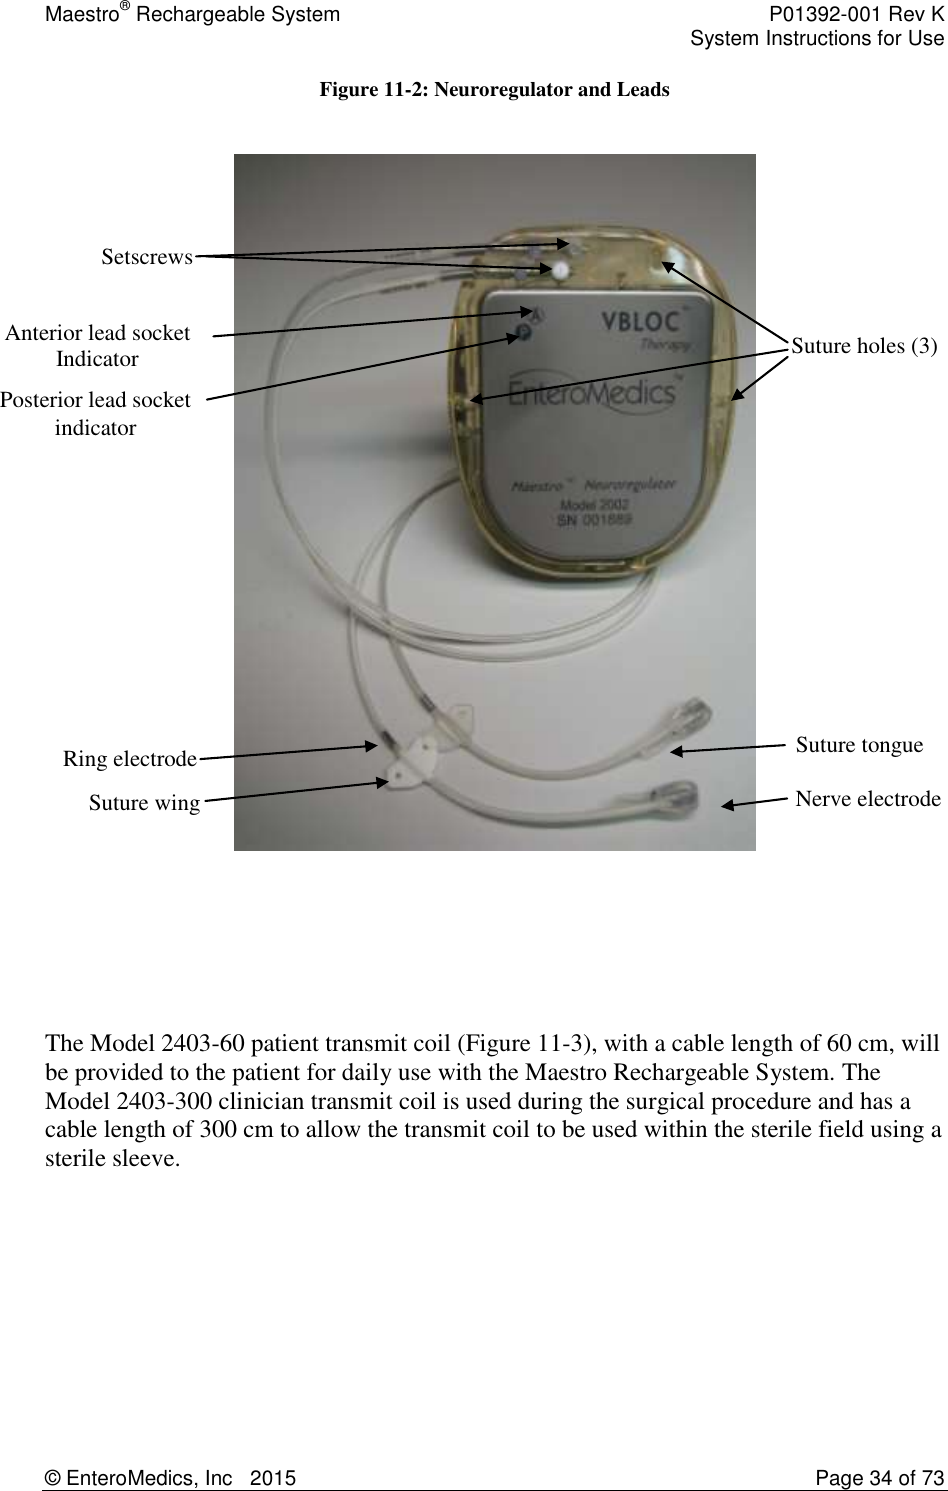 Maestro® Rechargeable System    P01392-001 Rev K     System Instructions for Use  © EnteroMedics, Inc   2015  Page 34 of 73  Figure 11-2: Neuroregulator and Leads       The Model 2403-60 patient transmit coil (Figure 11-3), with a cable length of 60 cm, will be provided to the patient for daily use with the Maestro Rechargeable System. The Model 2403-300 clinician transmit coil is used during the surgical procedure and has a cable length of 300 cm to allow the transmit coil to be used within the sterile field using a sterile sleeve.      Nerve electrode Suture tongue Suture holes (3) Suture wing Setscrews Anterior lead socket Indicator Posterior lead socket indicator Ring electrode 